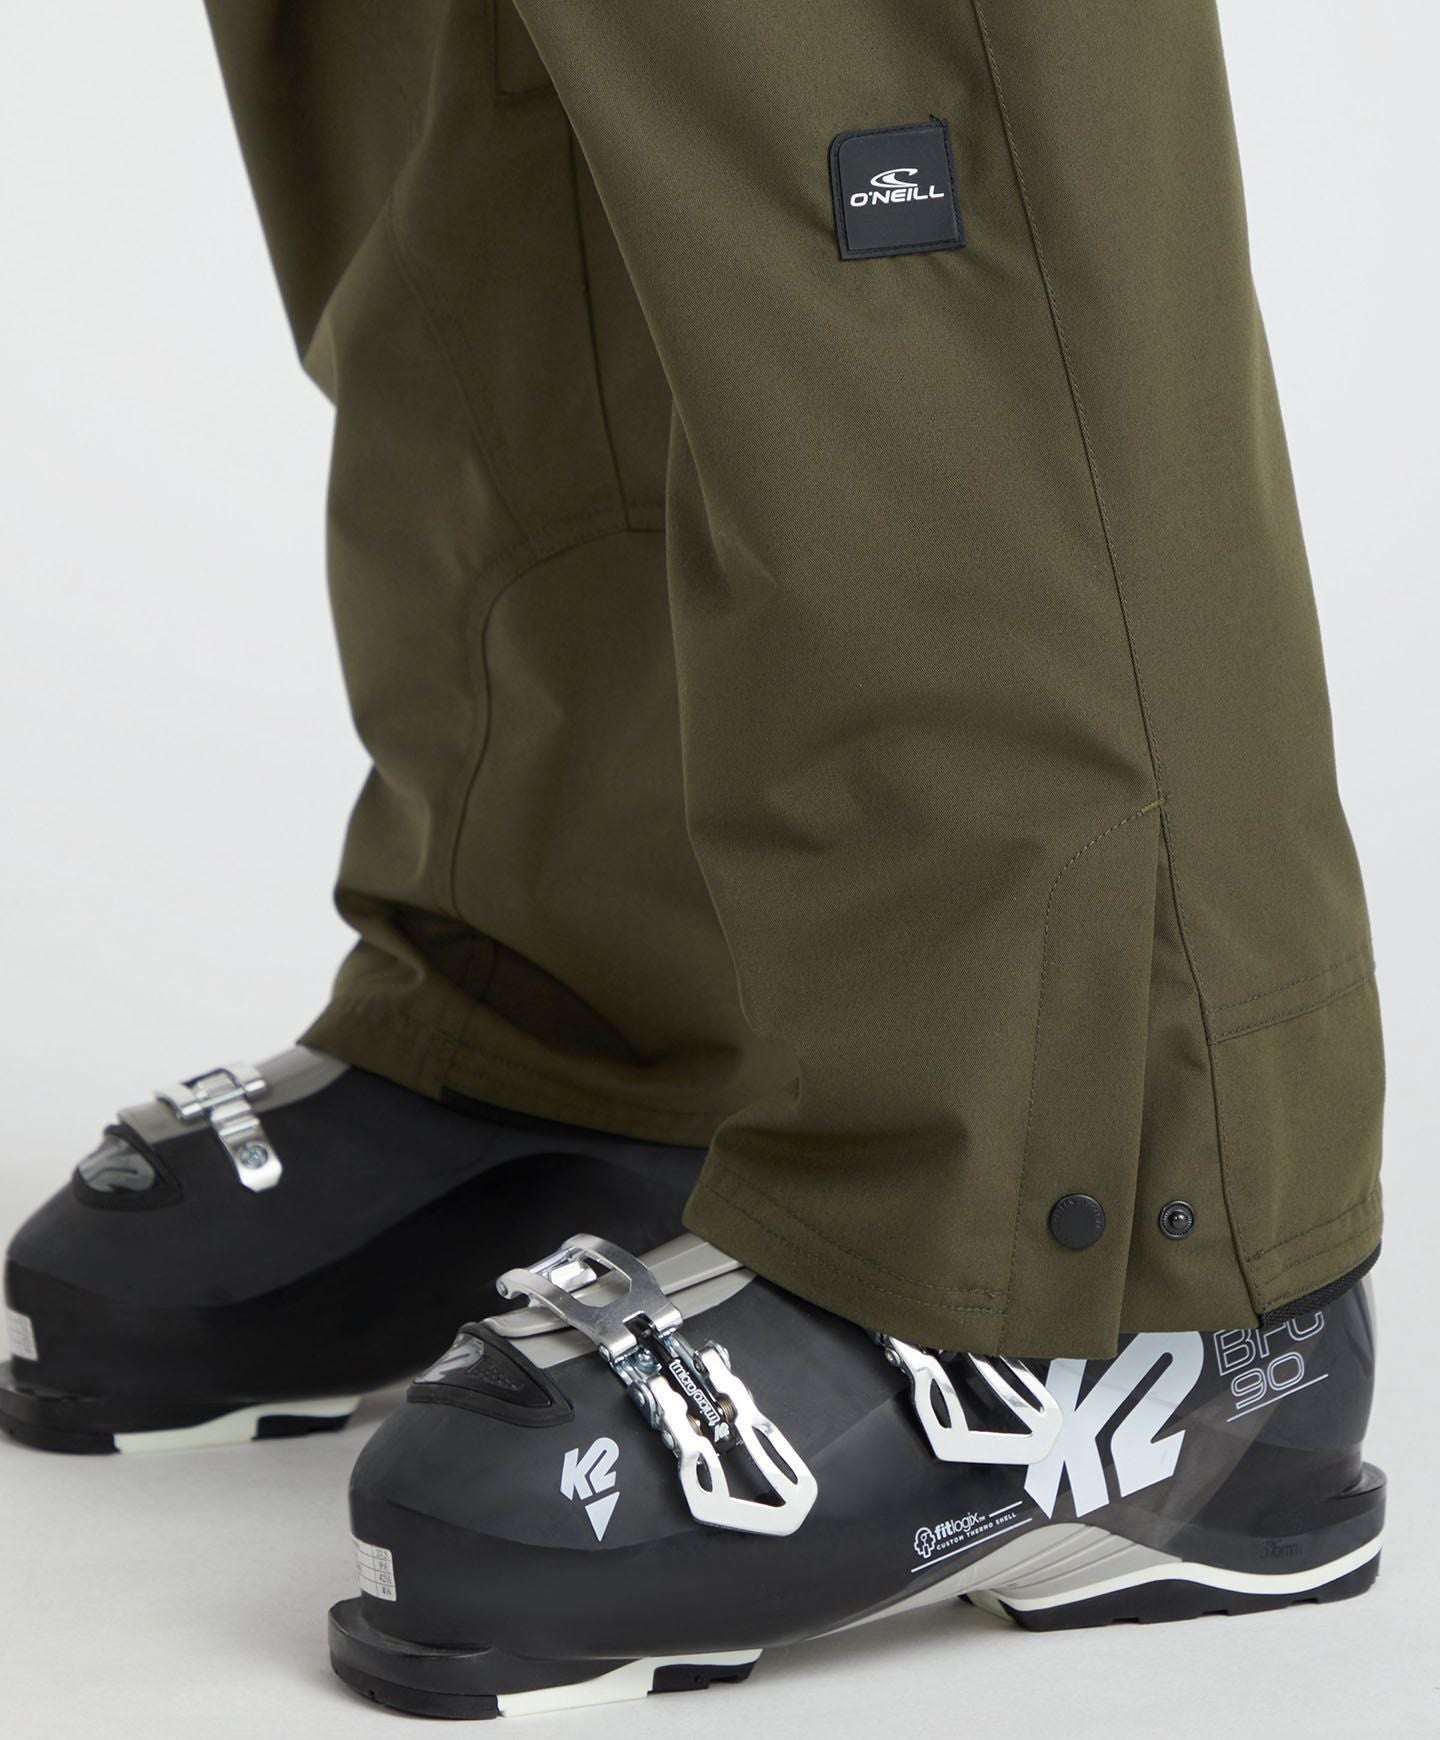 Men's Utility Snow Pants - Forest Night